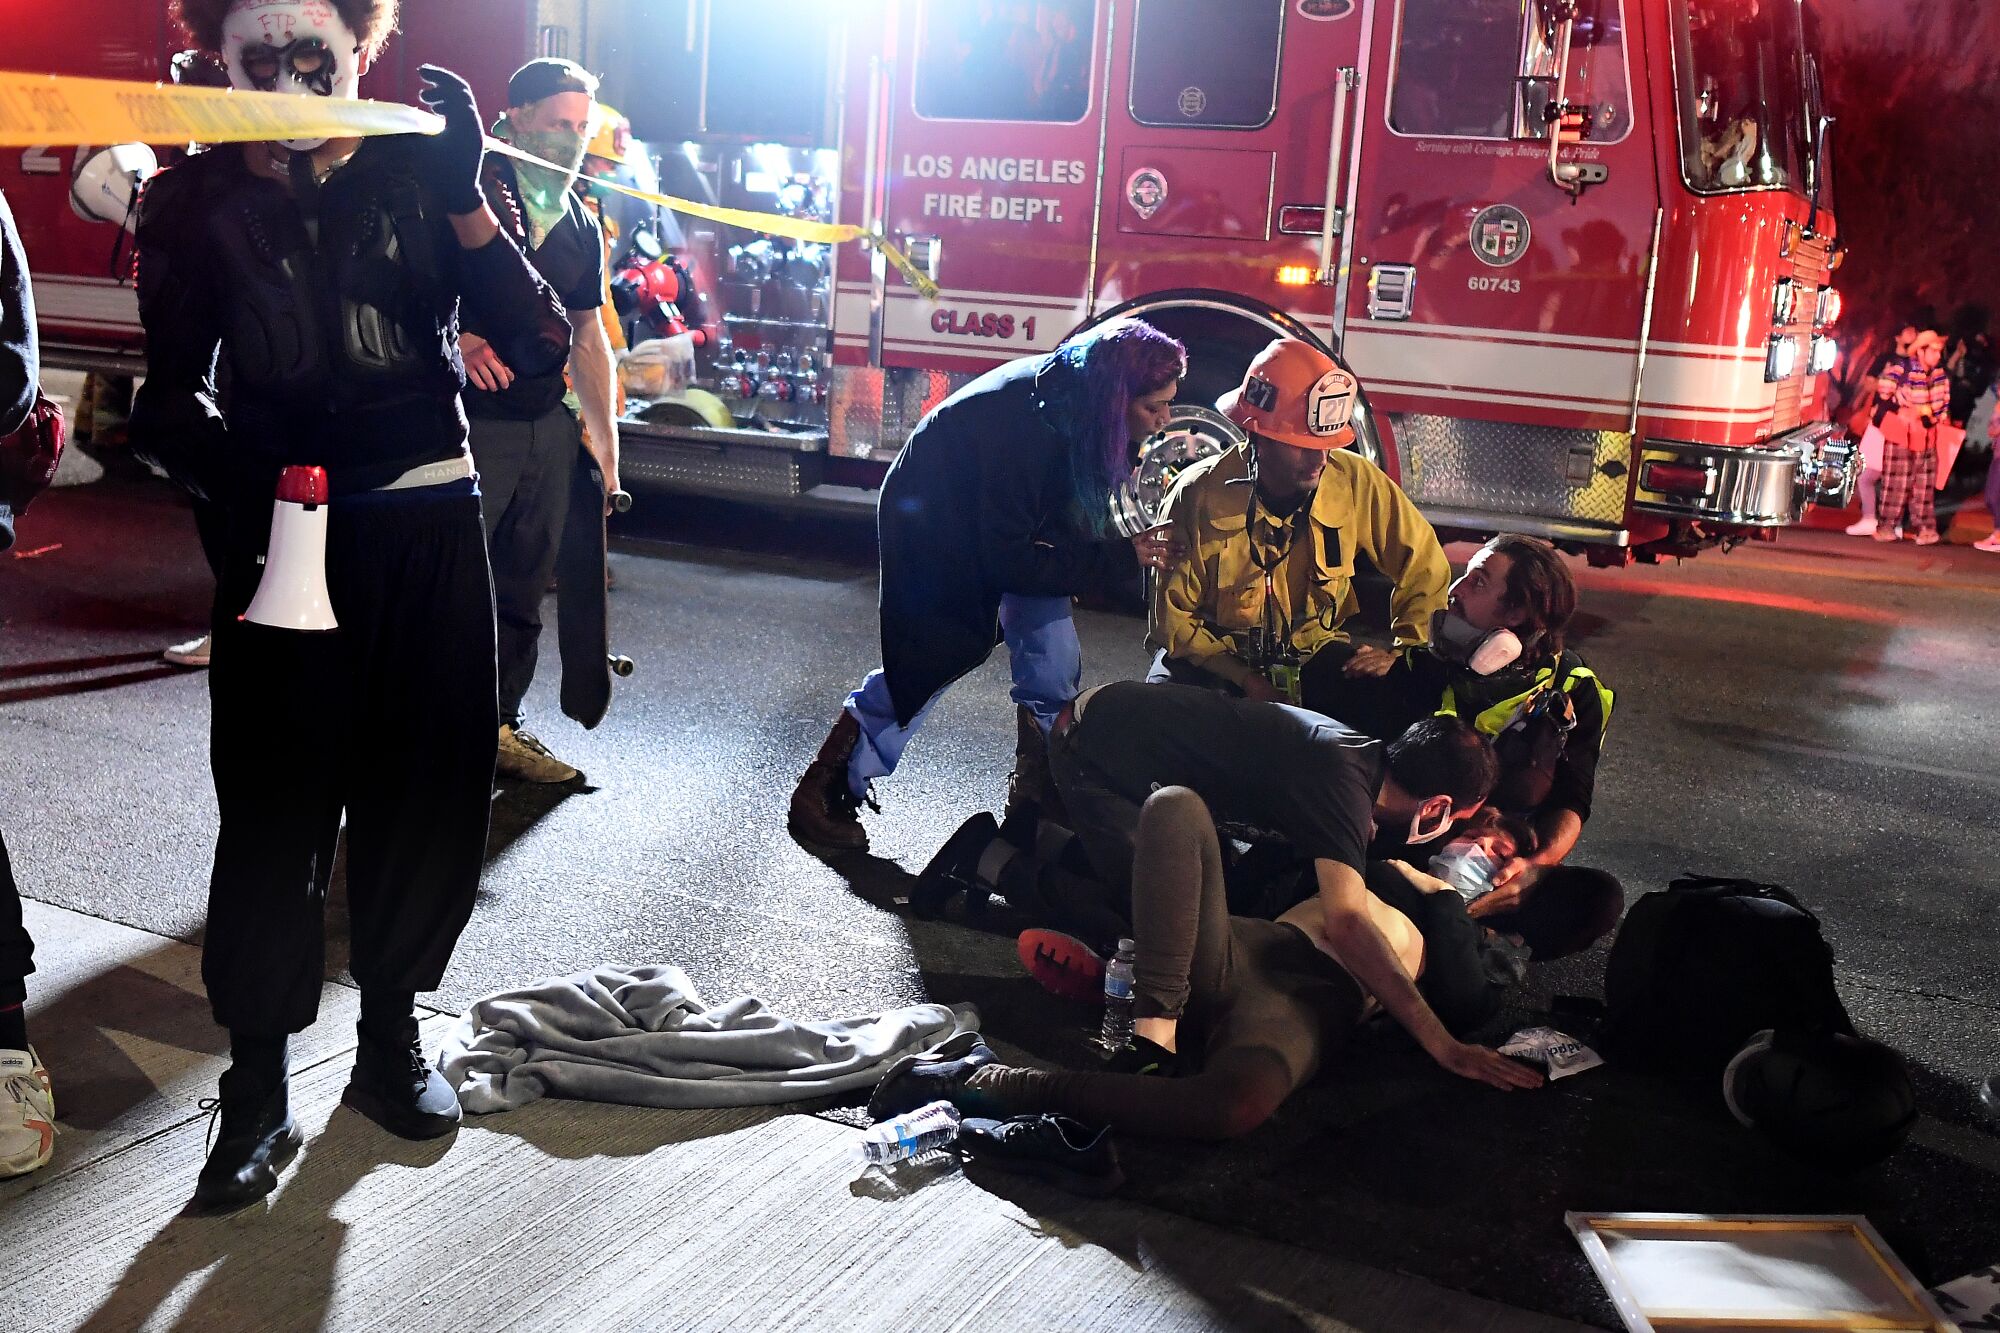 Paramedics arrive after a protester was hit by a truck in Hollywood